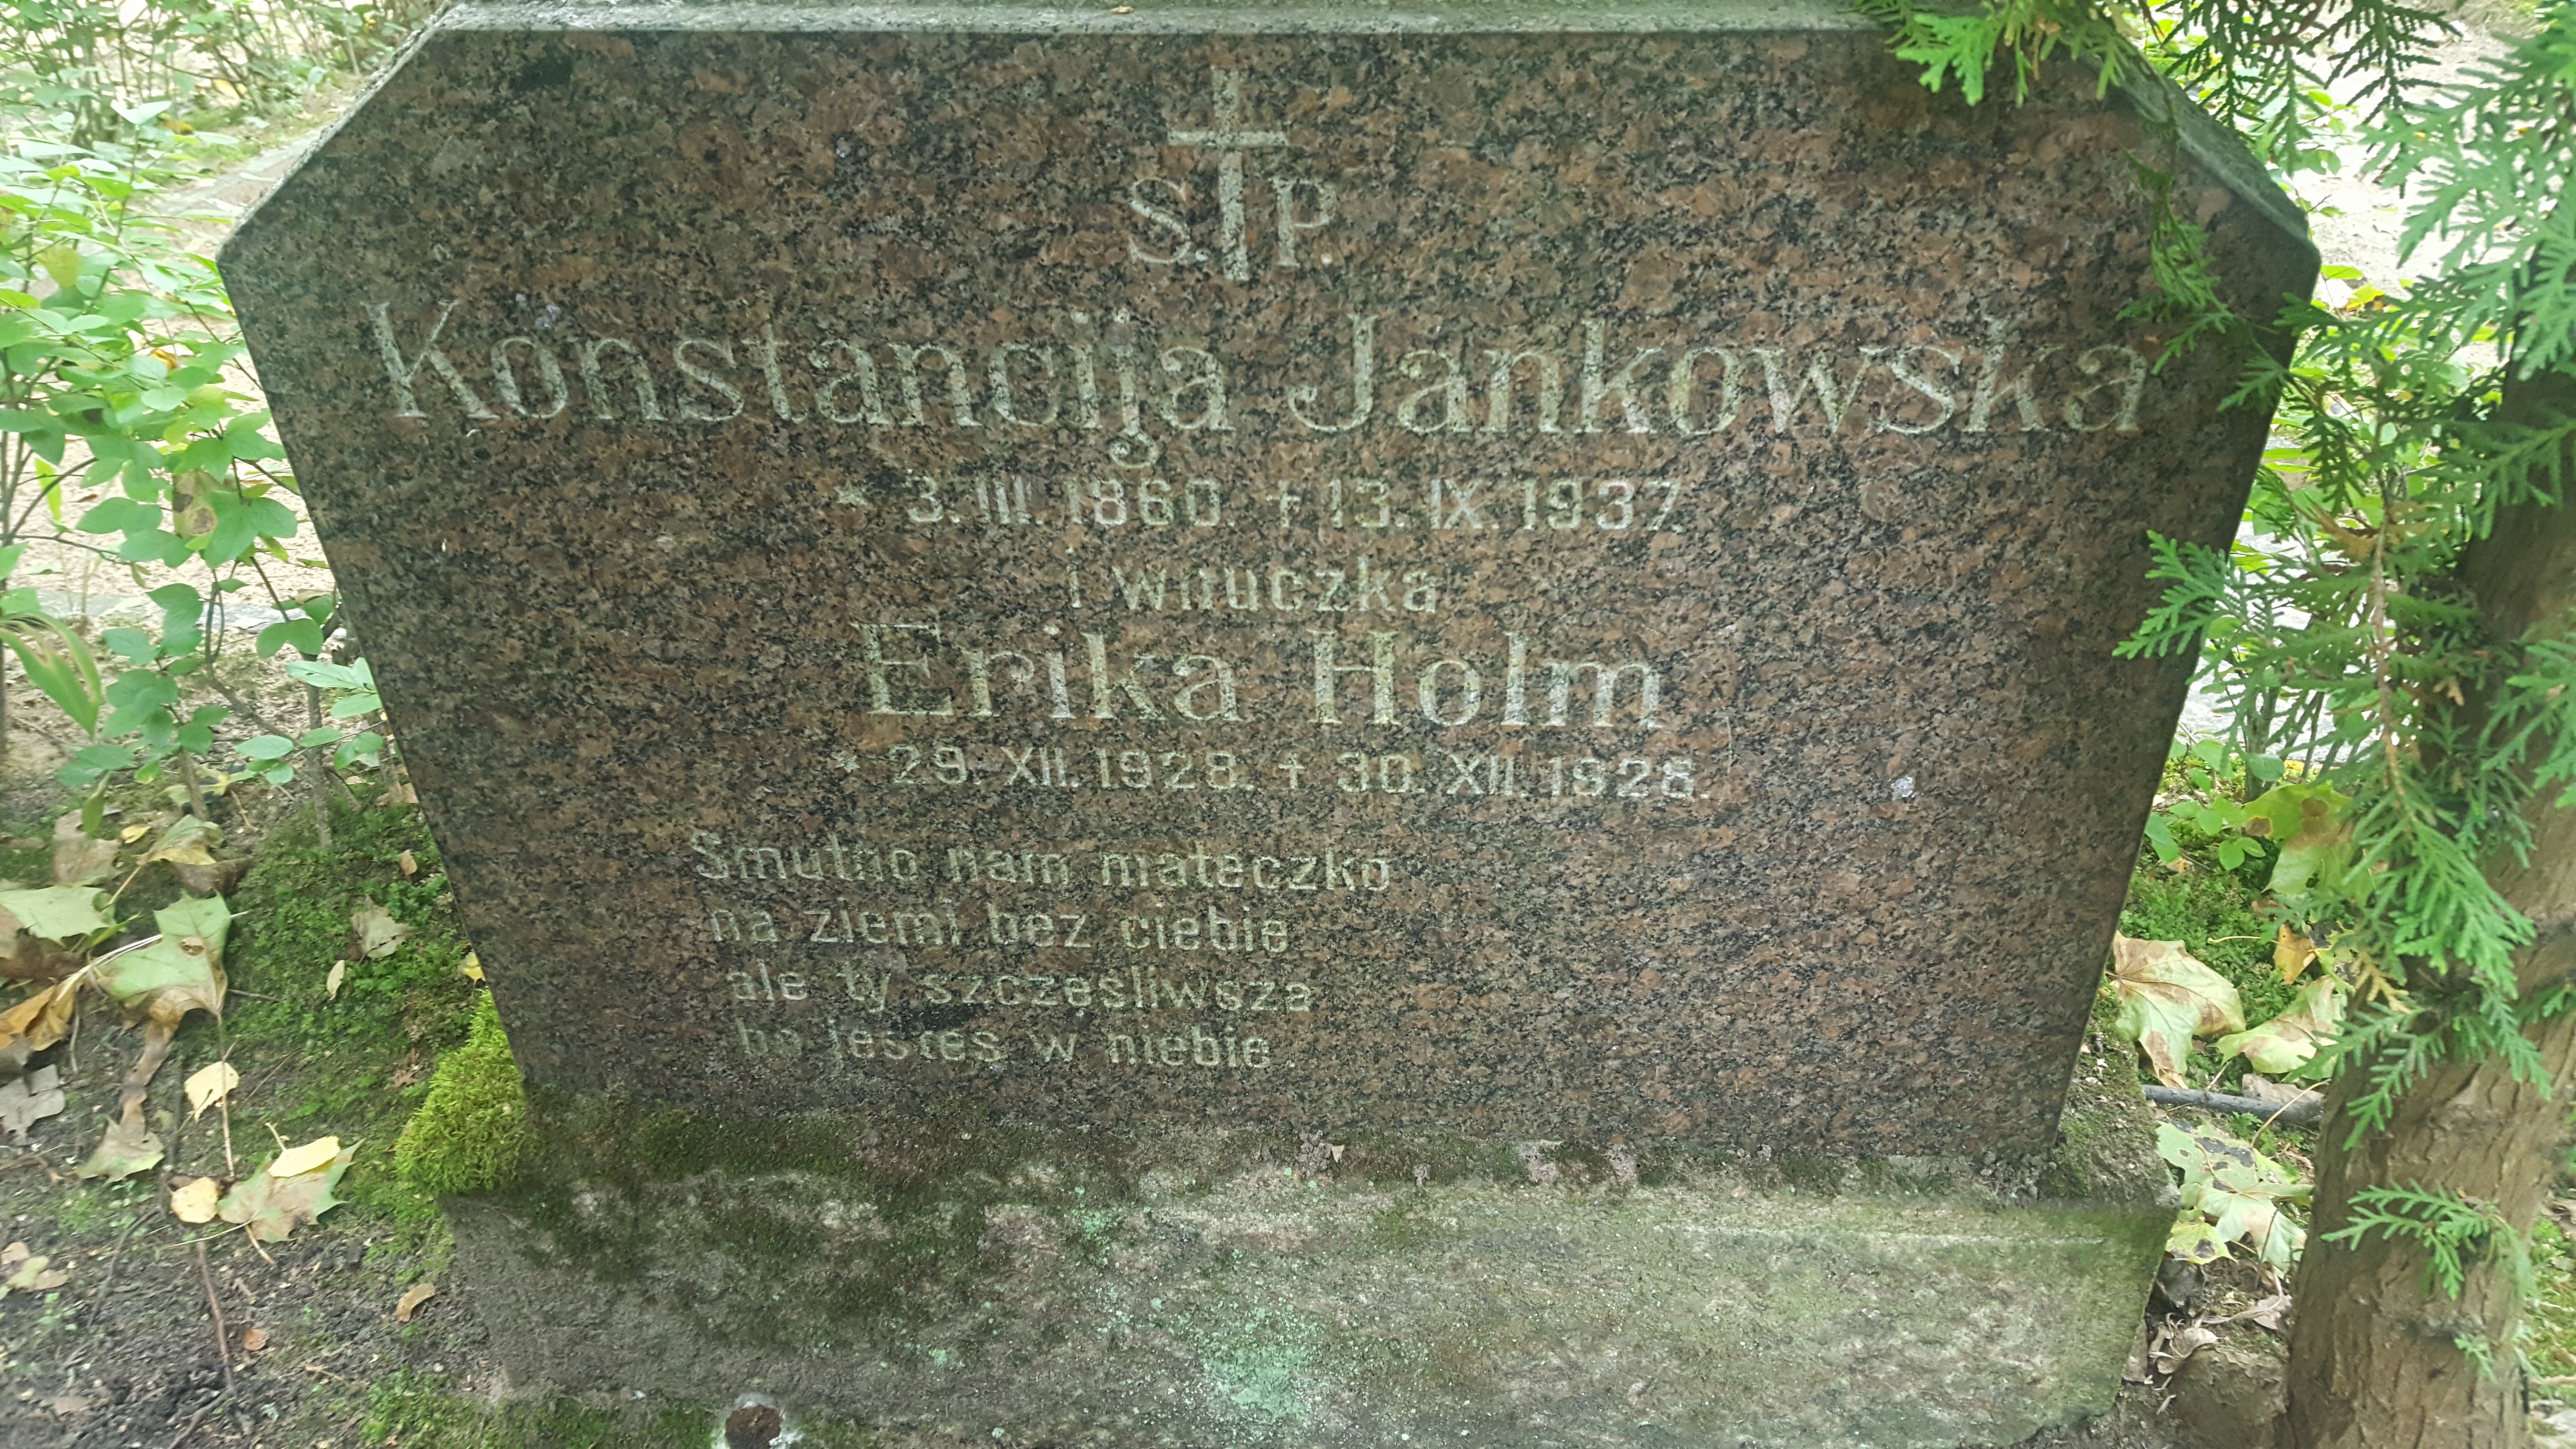 Tombstone of Konstancja Jankowska and Erika Holm, St Michael's cemetery in Riga, as of 2021.